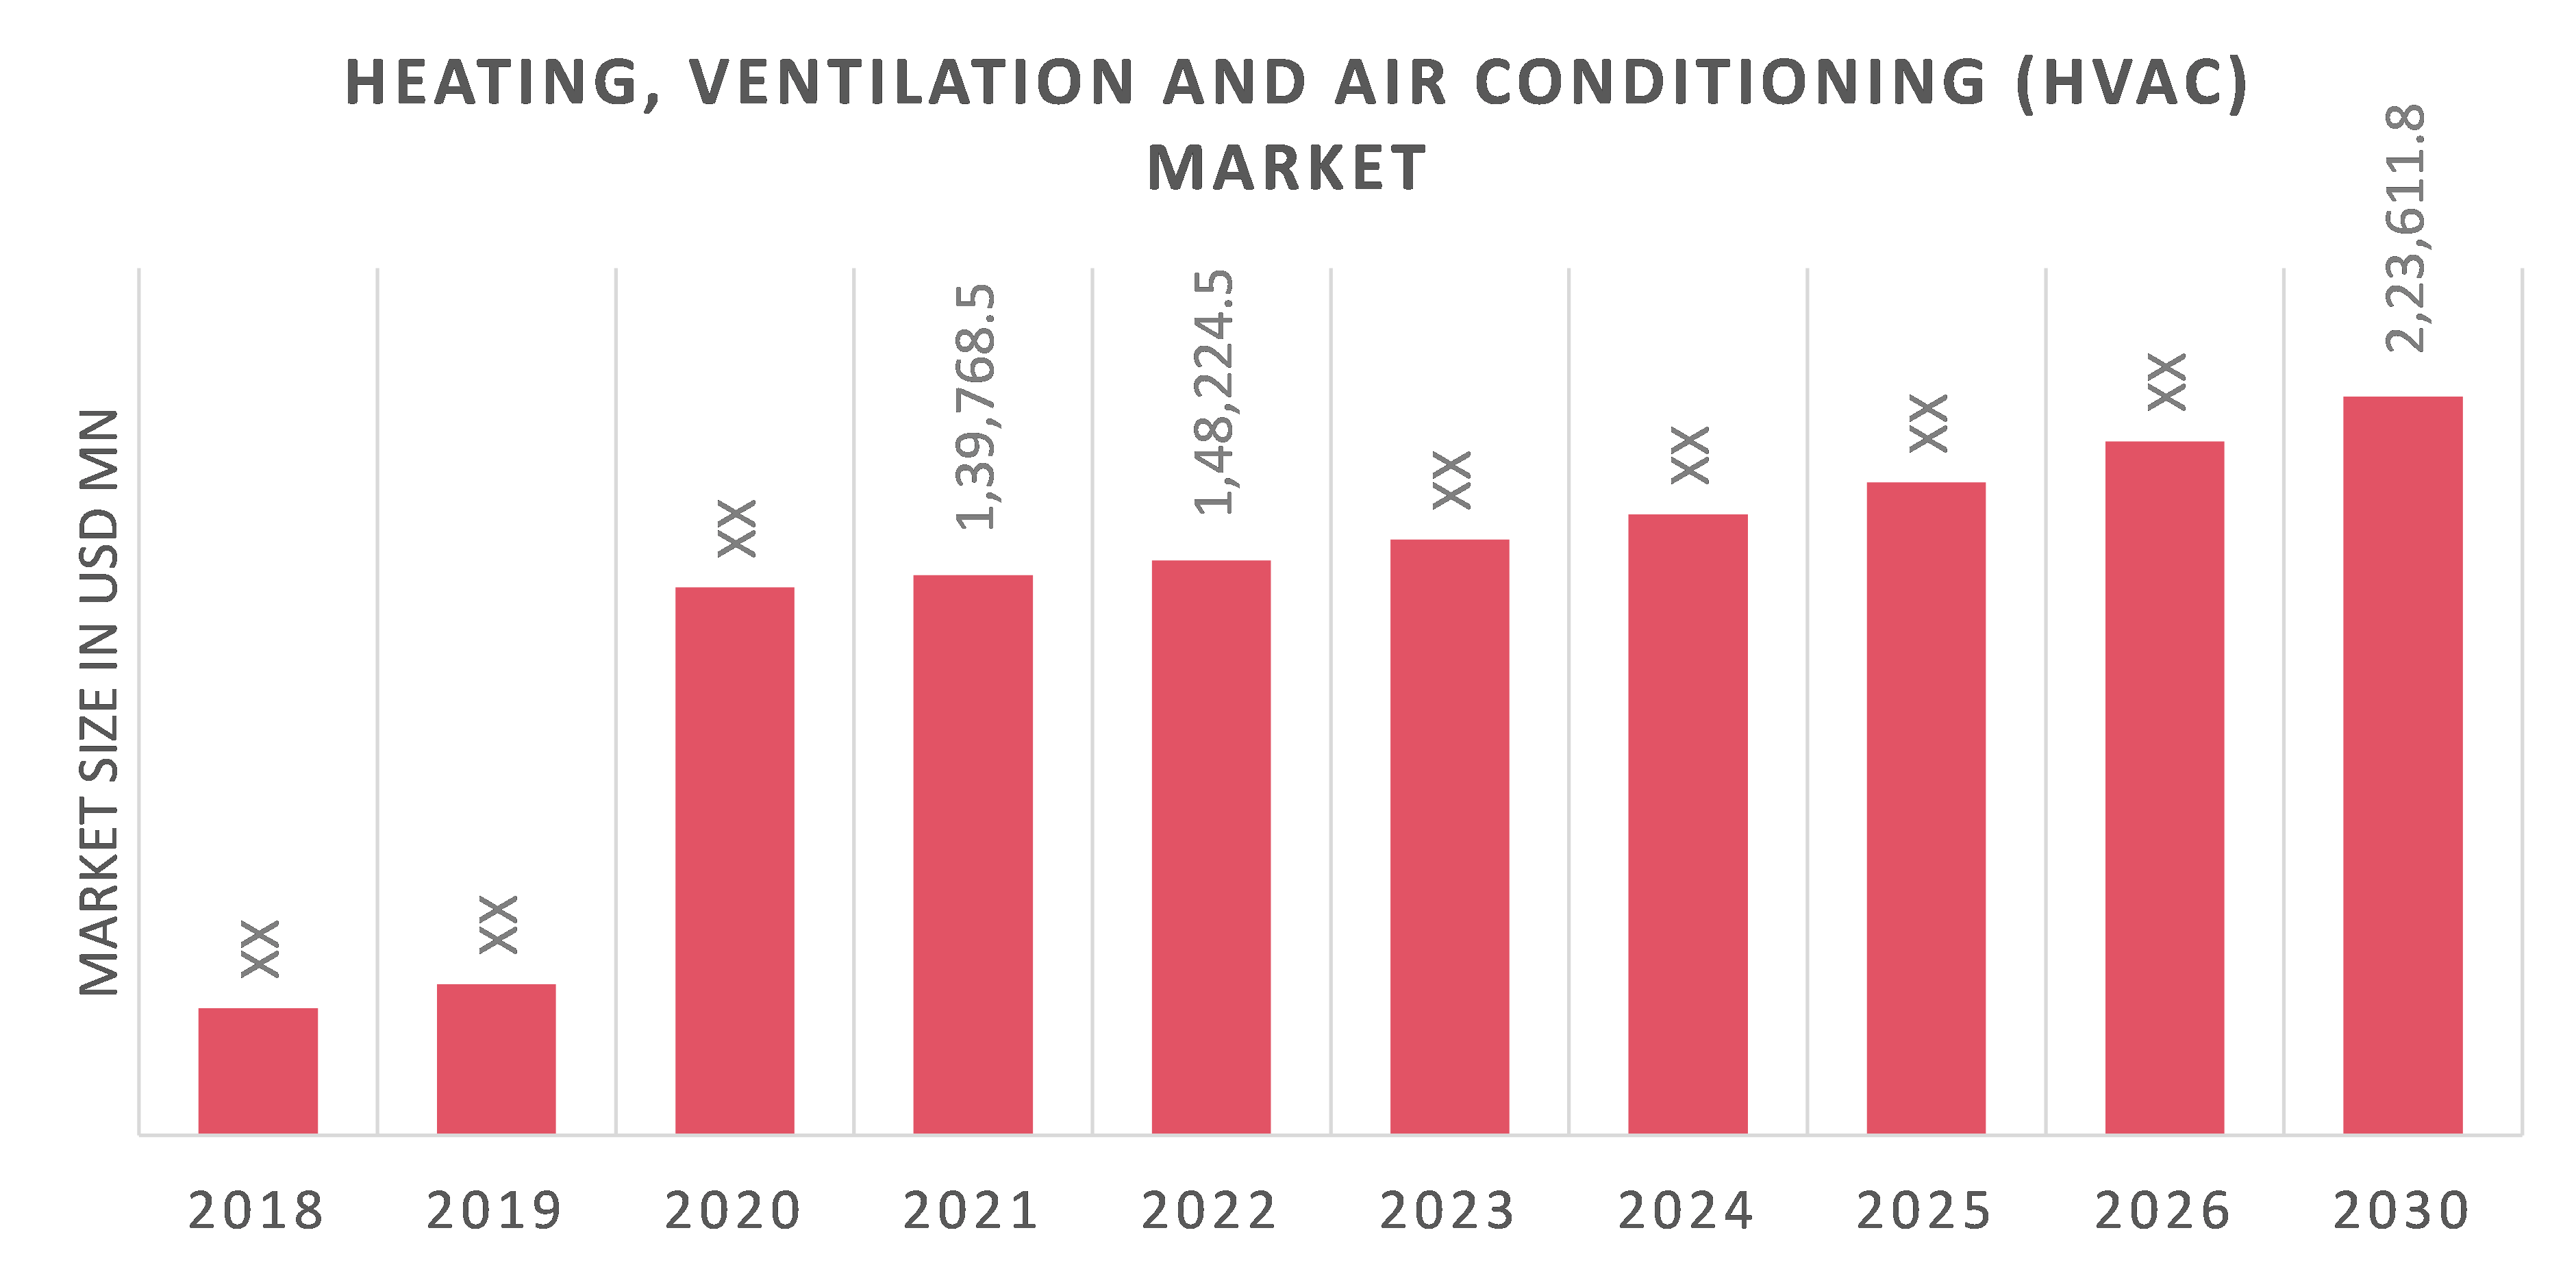 Global Heating, Ventilation and Air Conditioning (HVAC) Market Overview